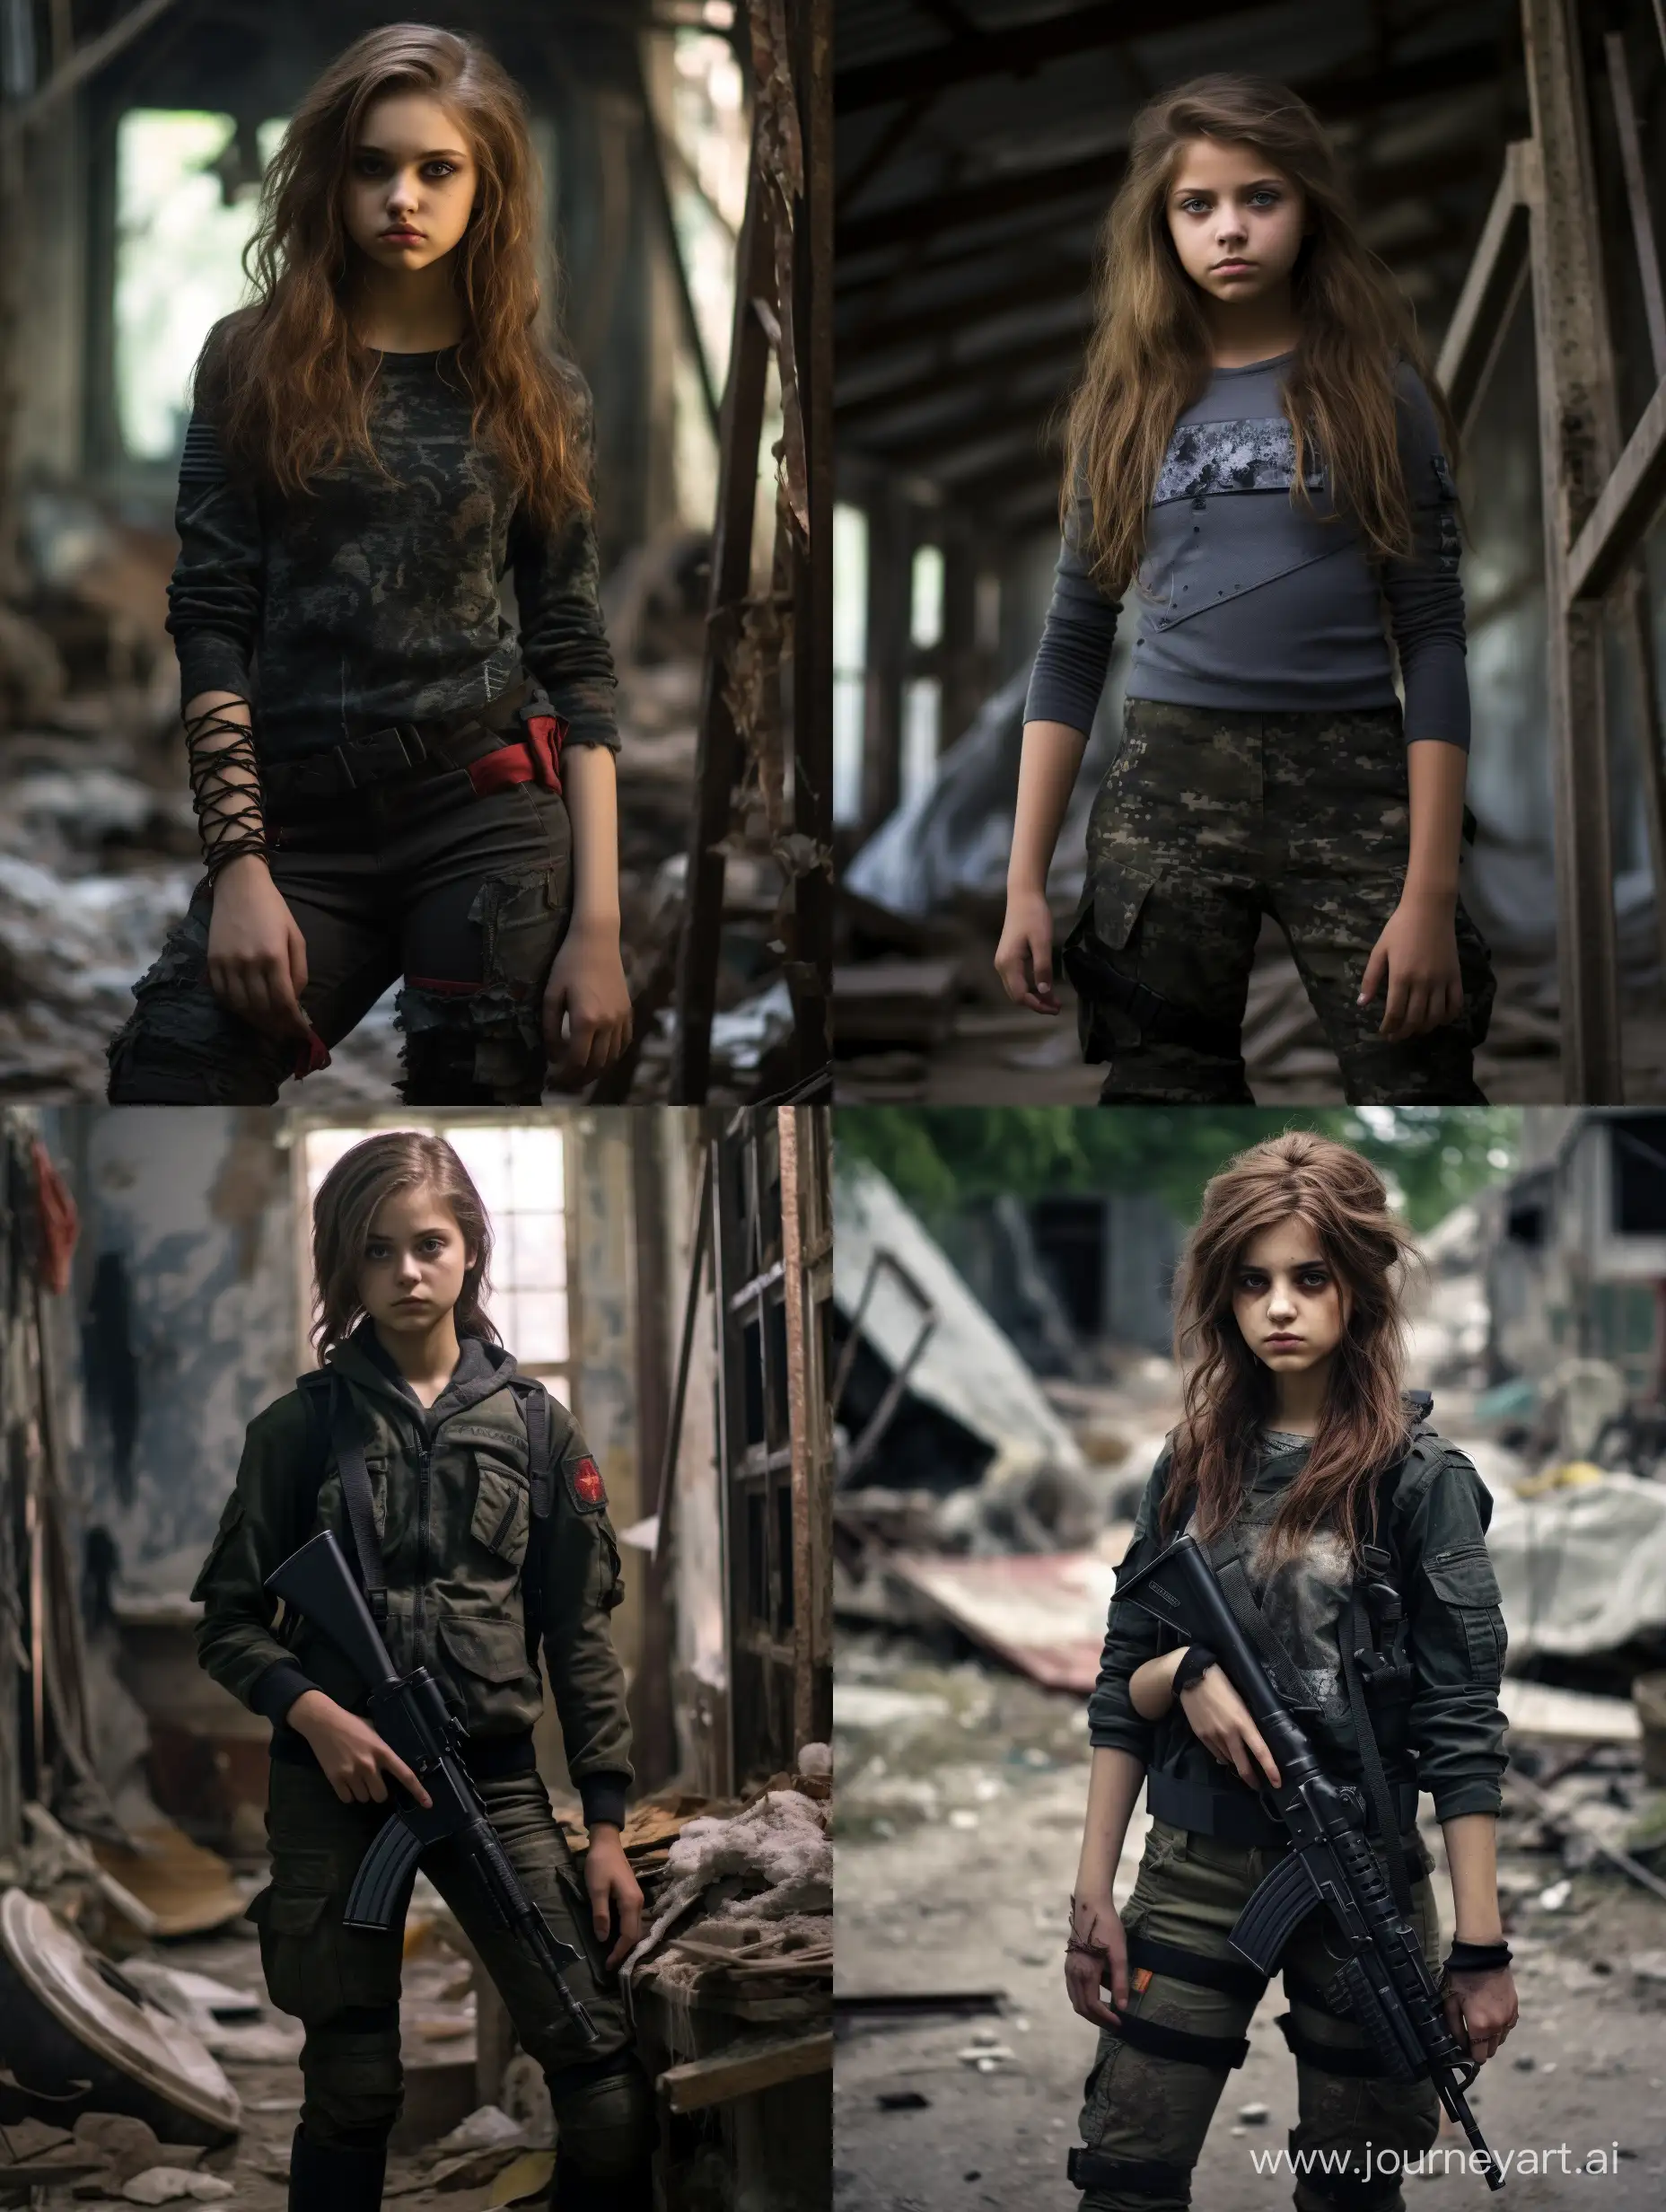 Post-Apocalypse, office, Communist military uniforms, кубинский революционер, tomboy in uniform, pretty 15 year old woman, tomboy, full body, military camouflage tight leggings, Photos 8K, modern military uniform, solo, without weapon